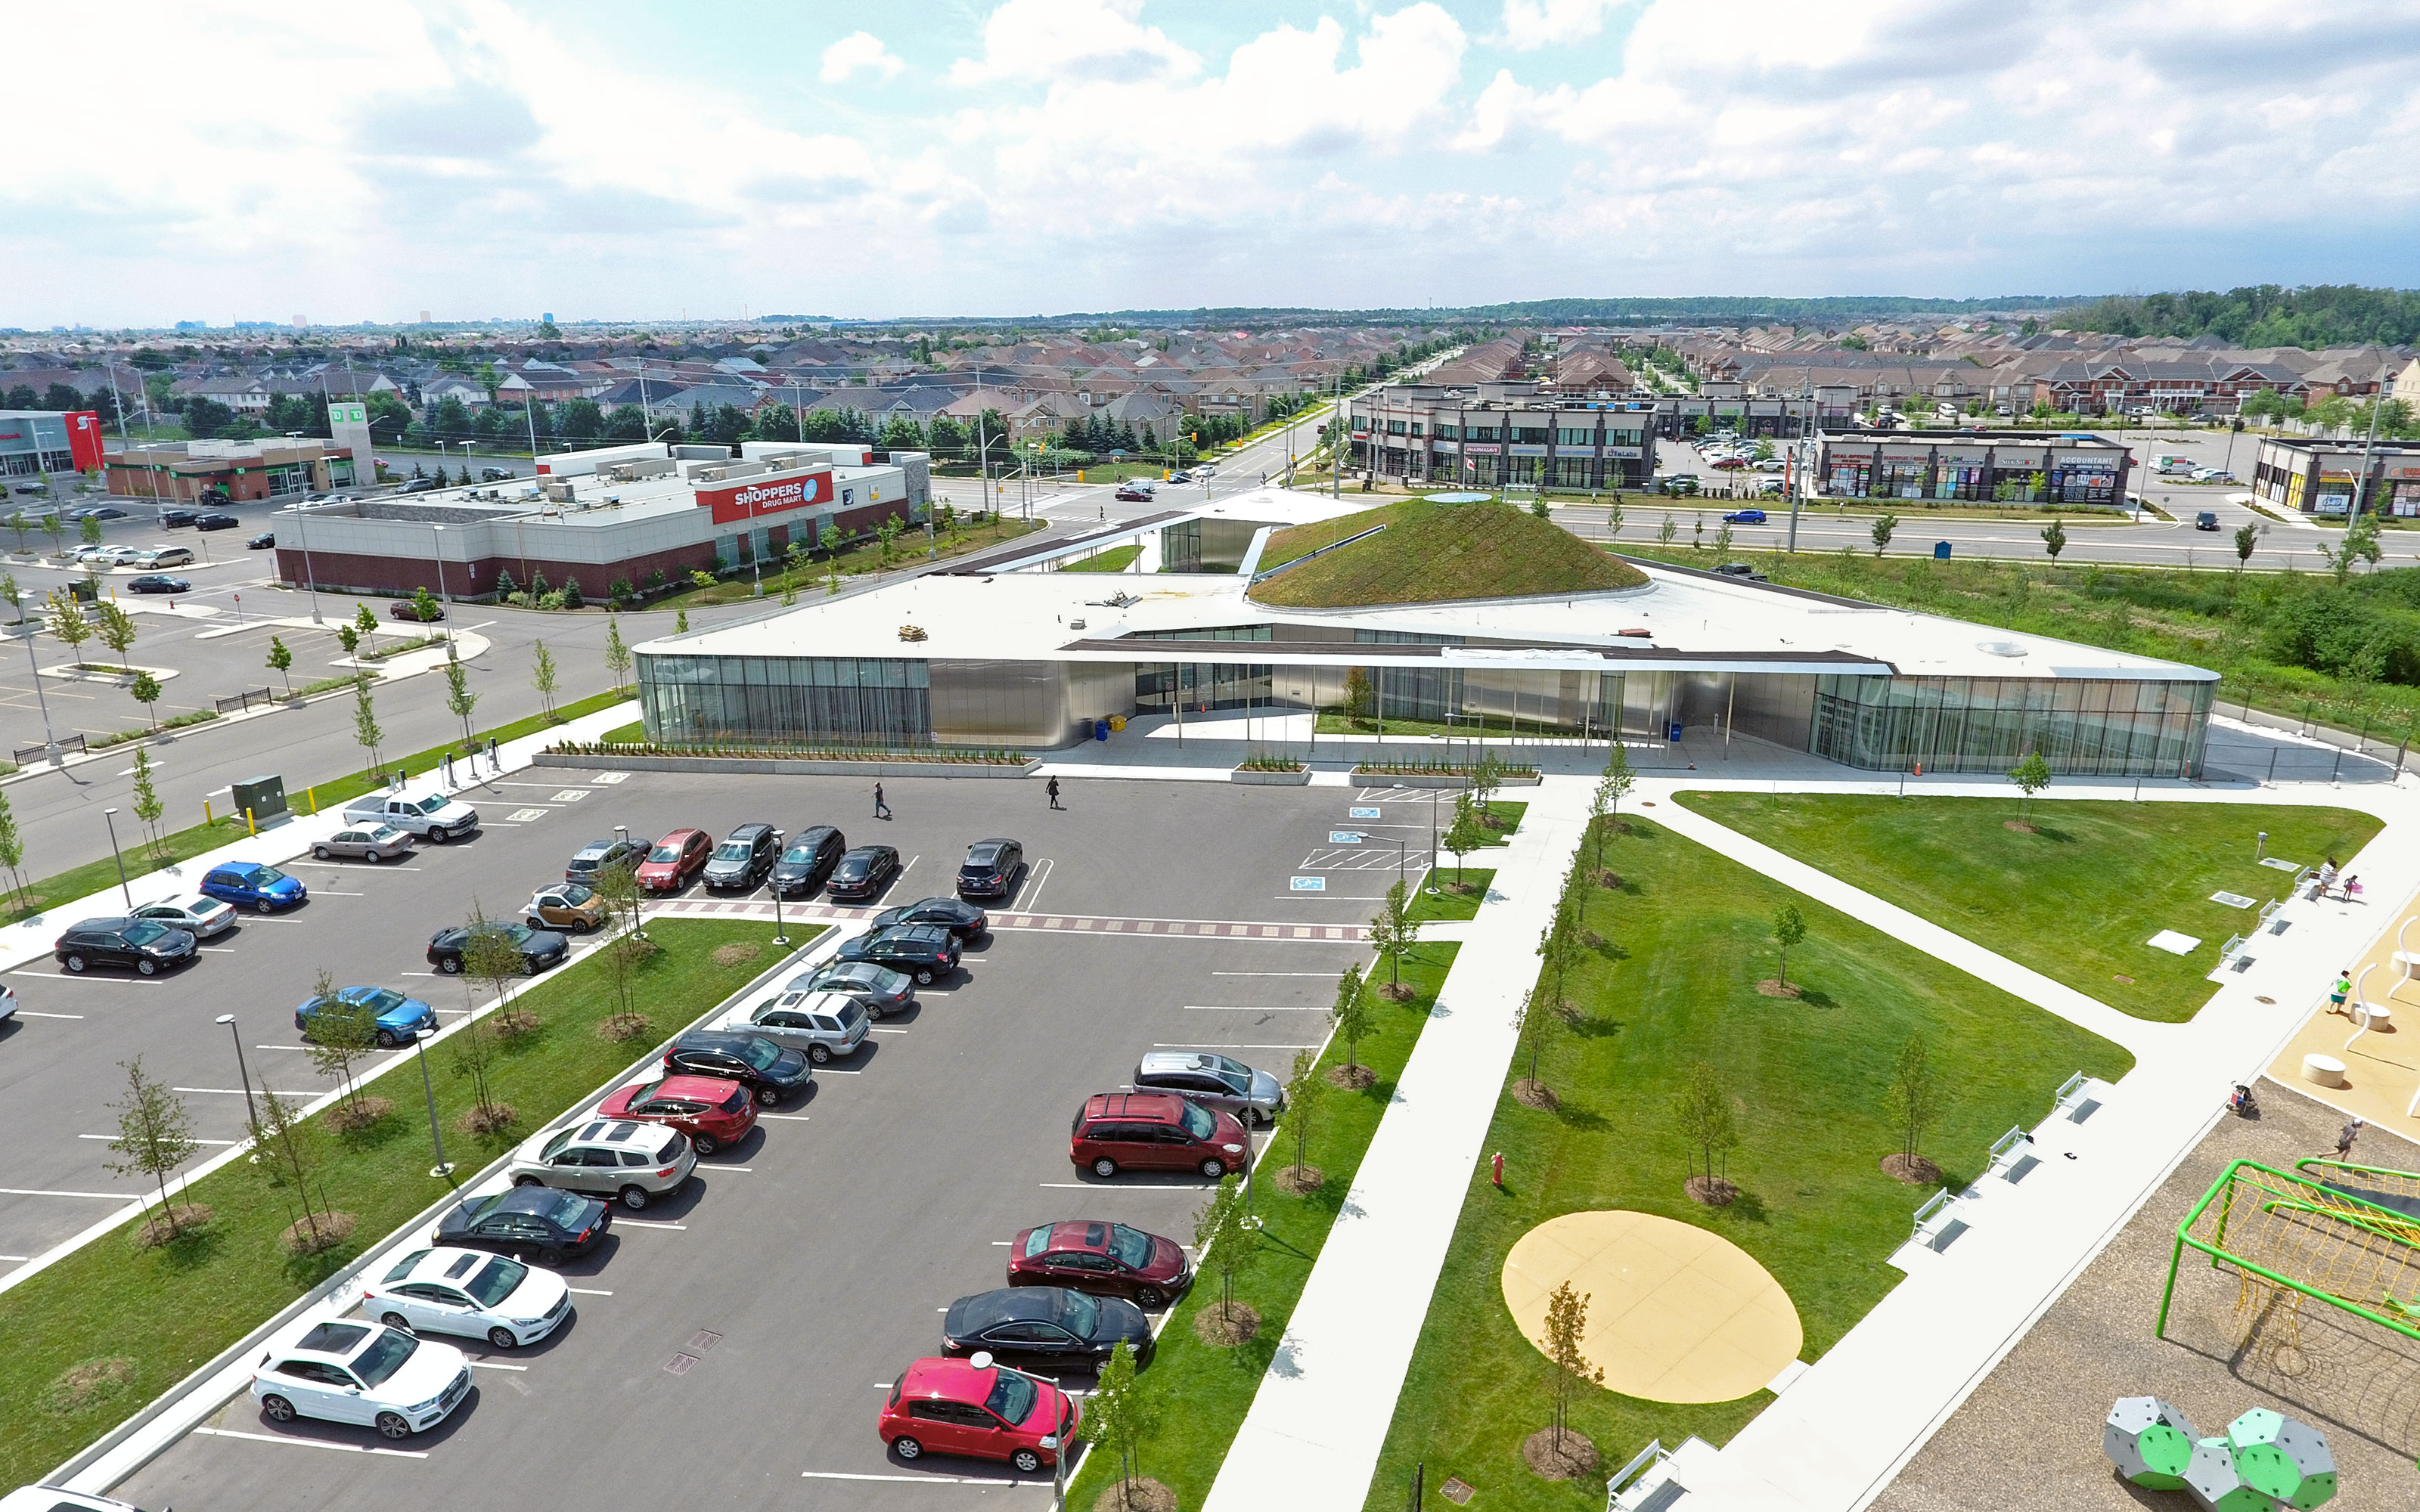 Large parking area in front of a building with pitched green roof